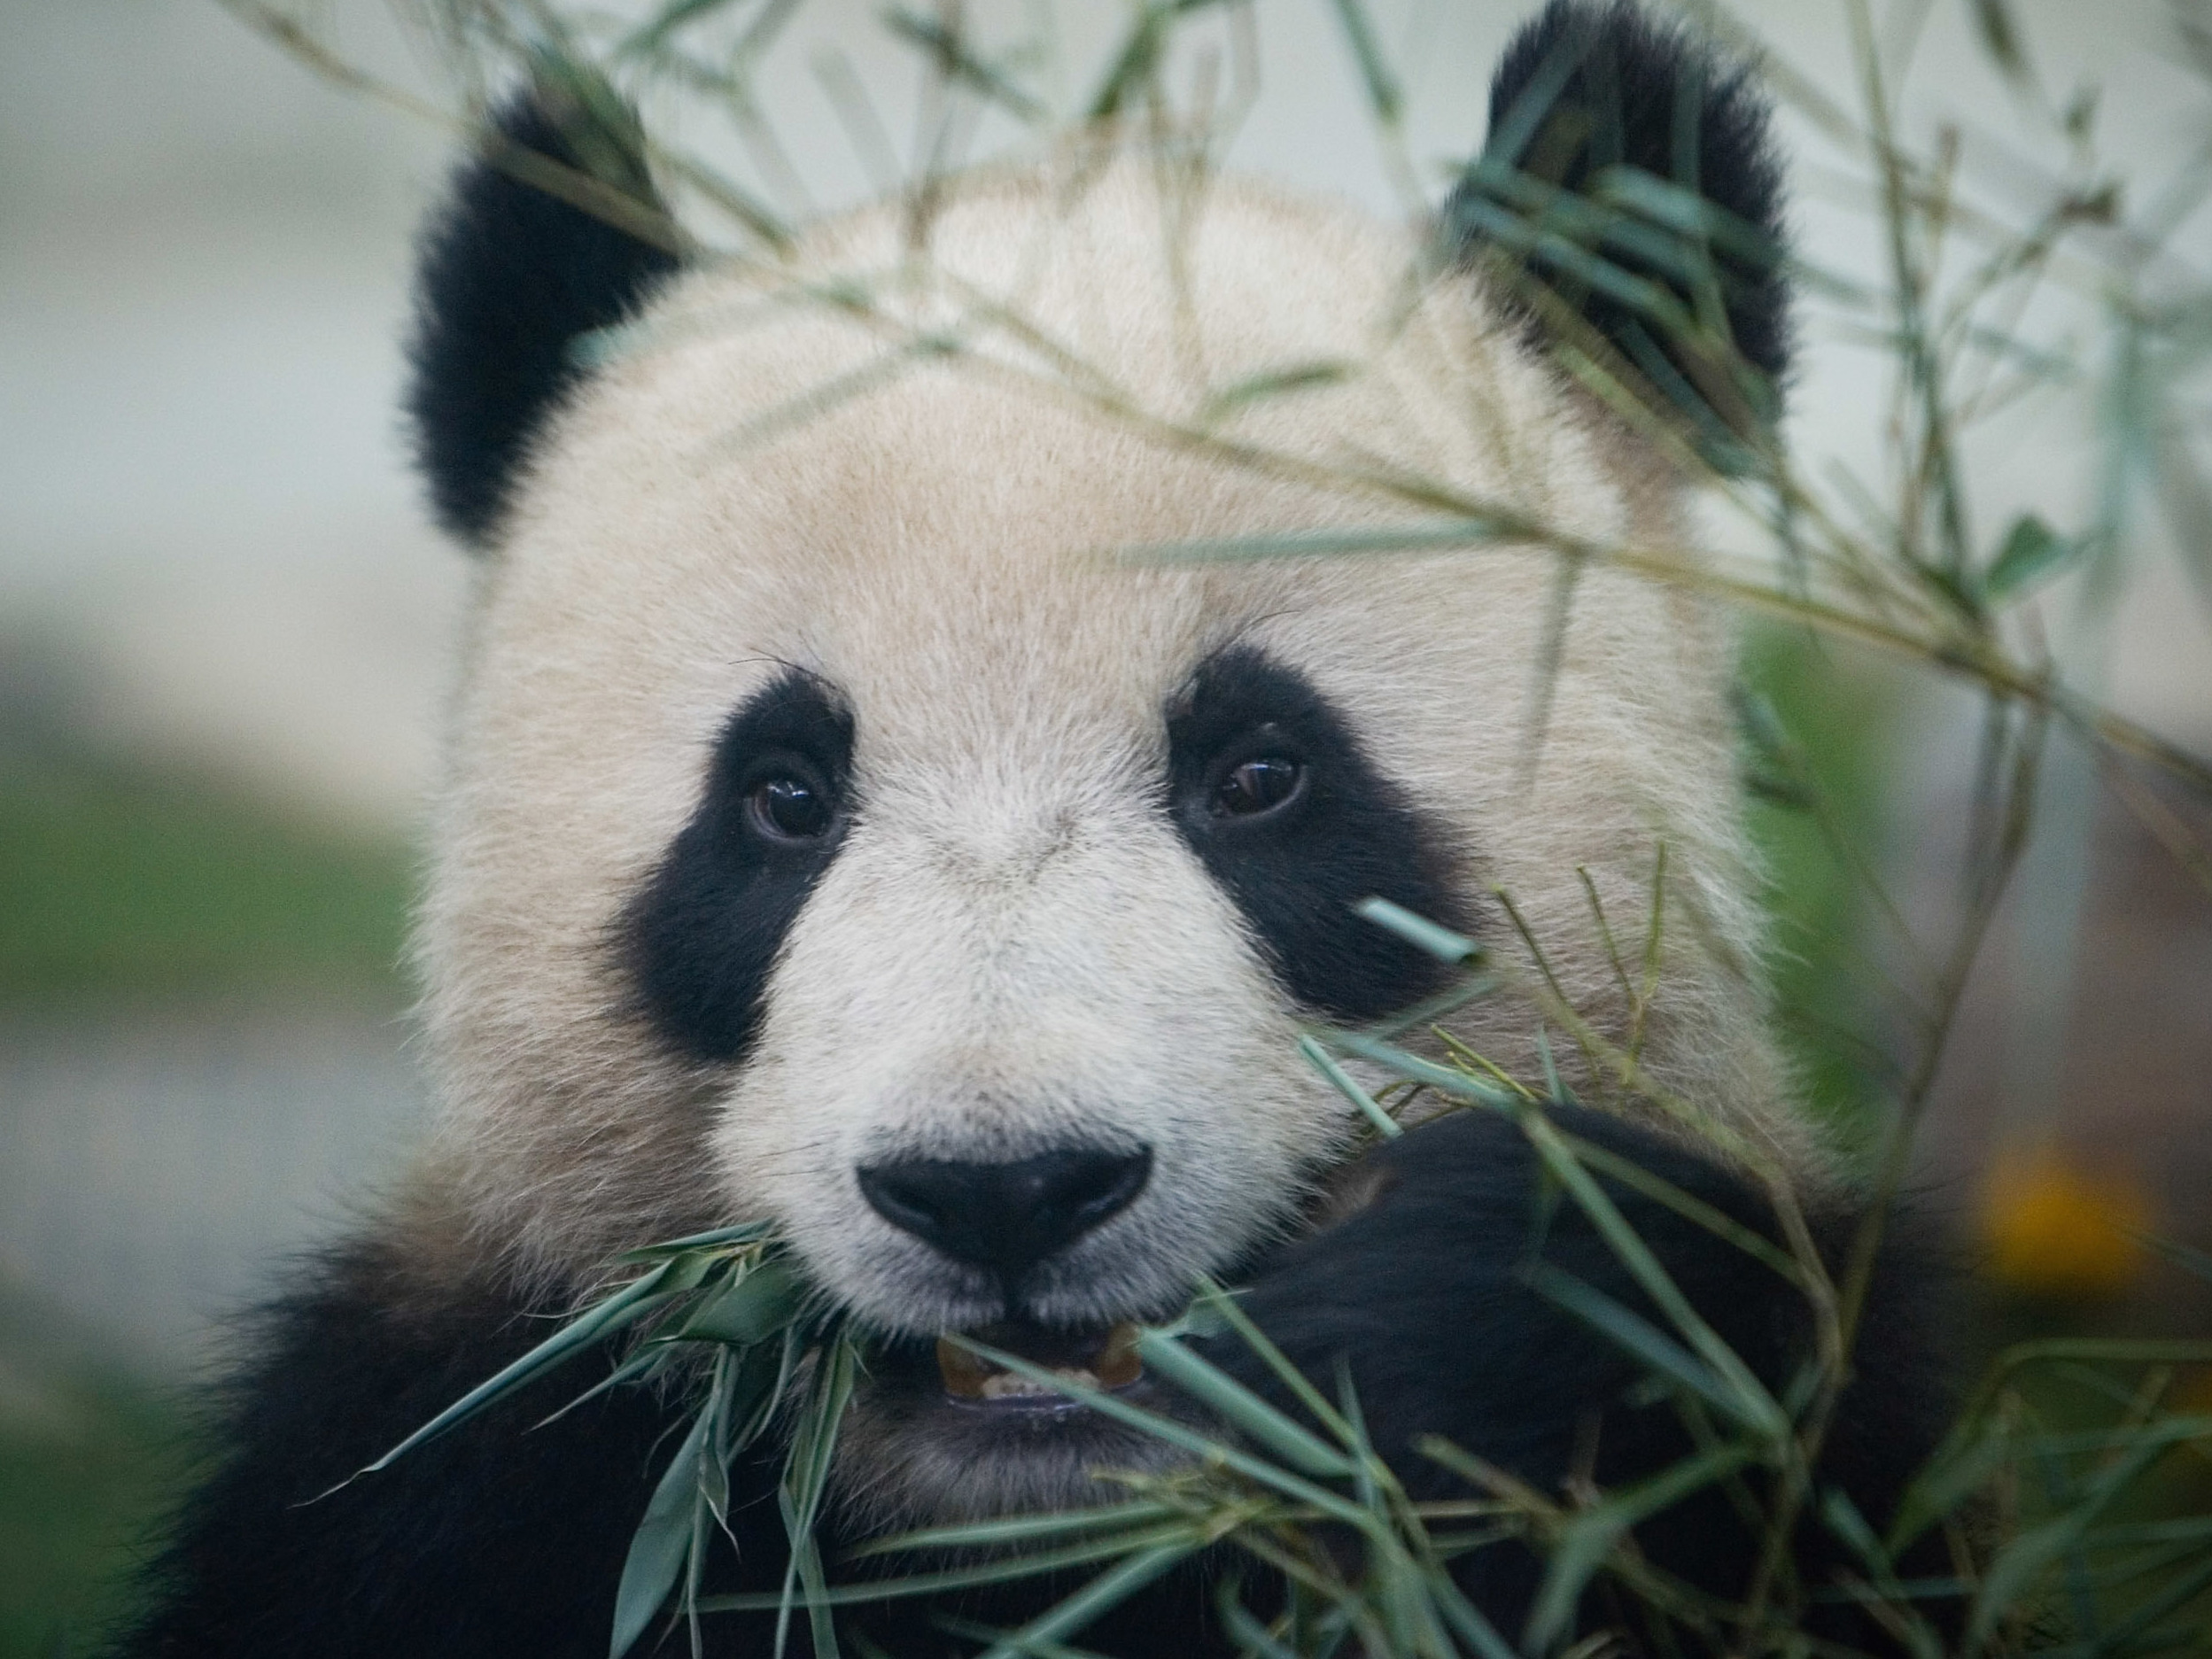 Why are giant pandas endangered?